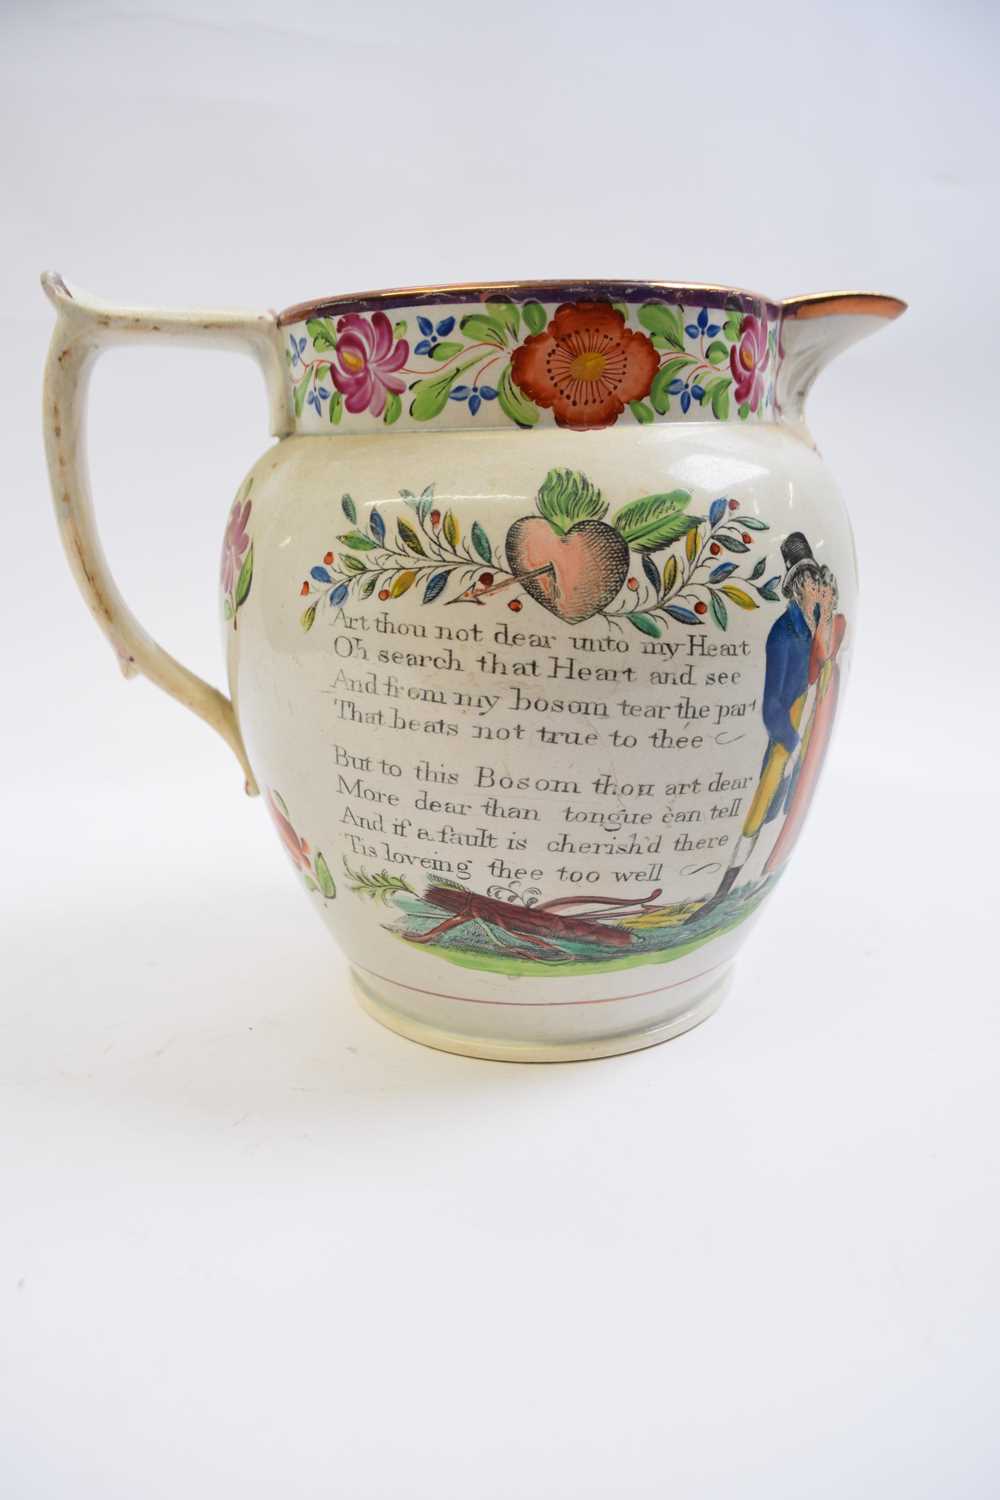 Pearl ware marriage jug decorated with a verse and print of a drinking sign, inscribed Samuel & - Image 2 of 4